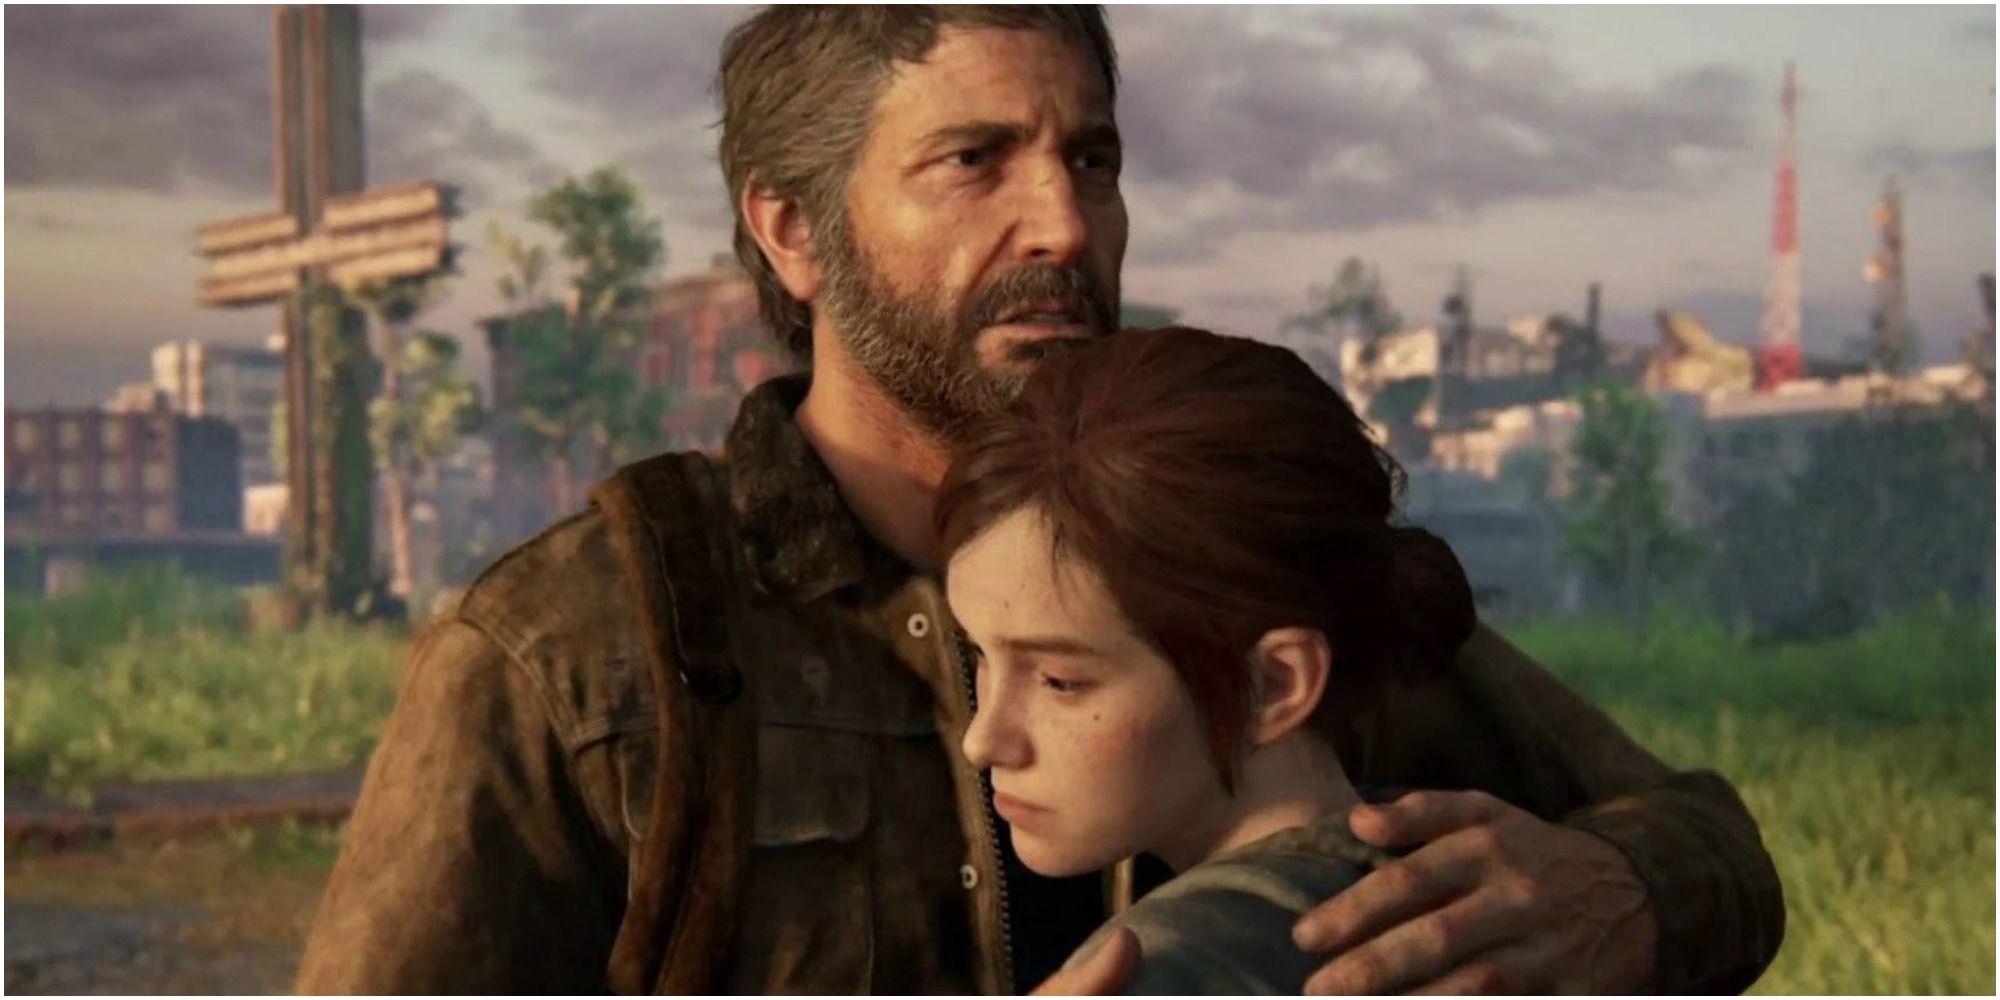 Joel and Ellie from The Last of Us share a hug